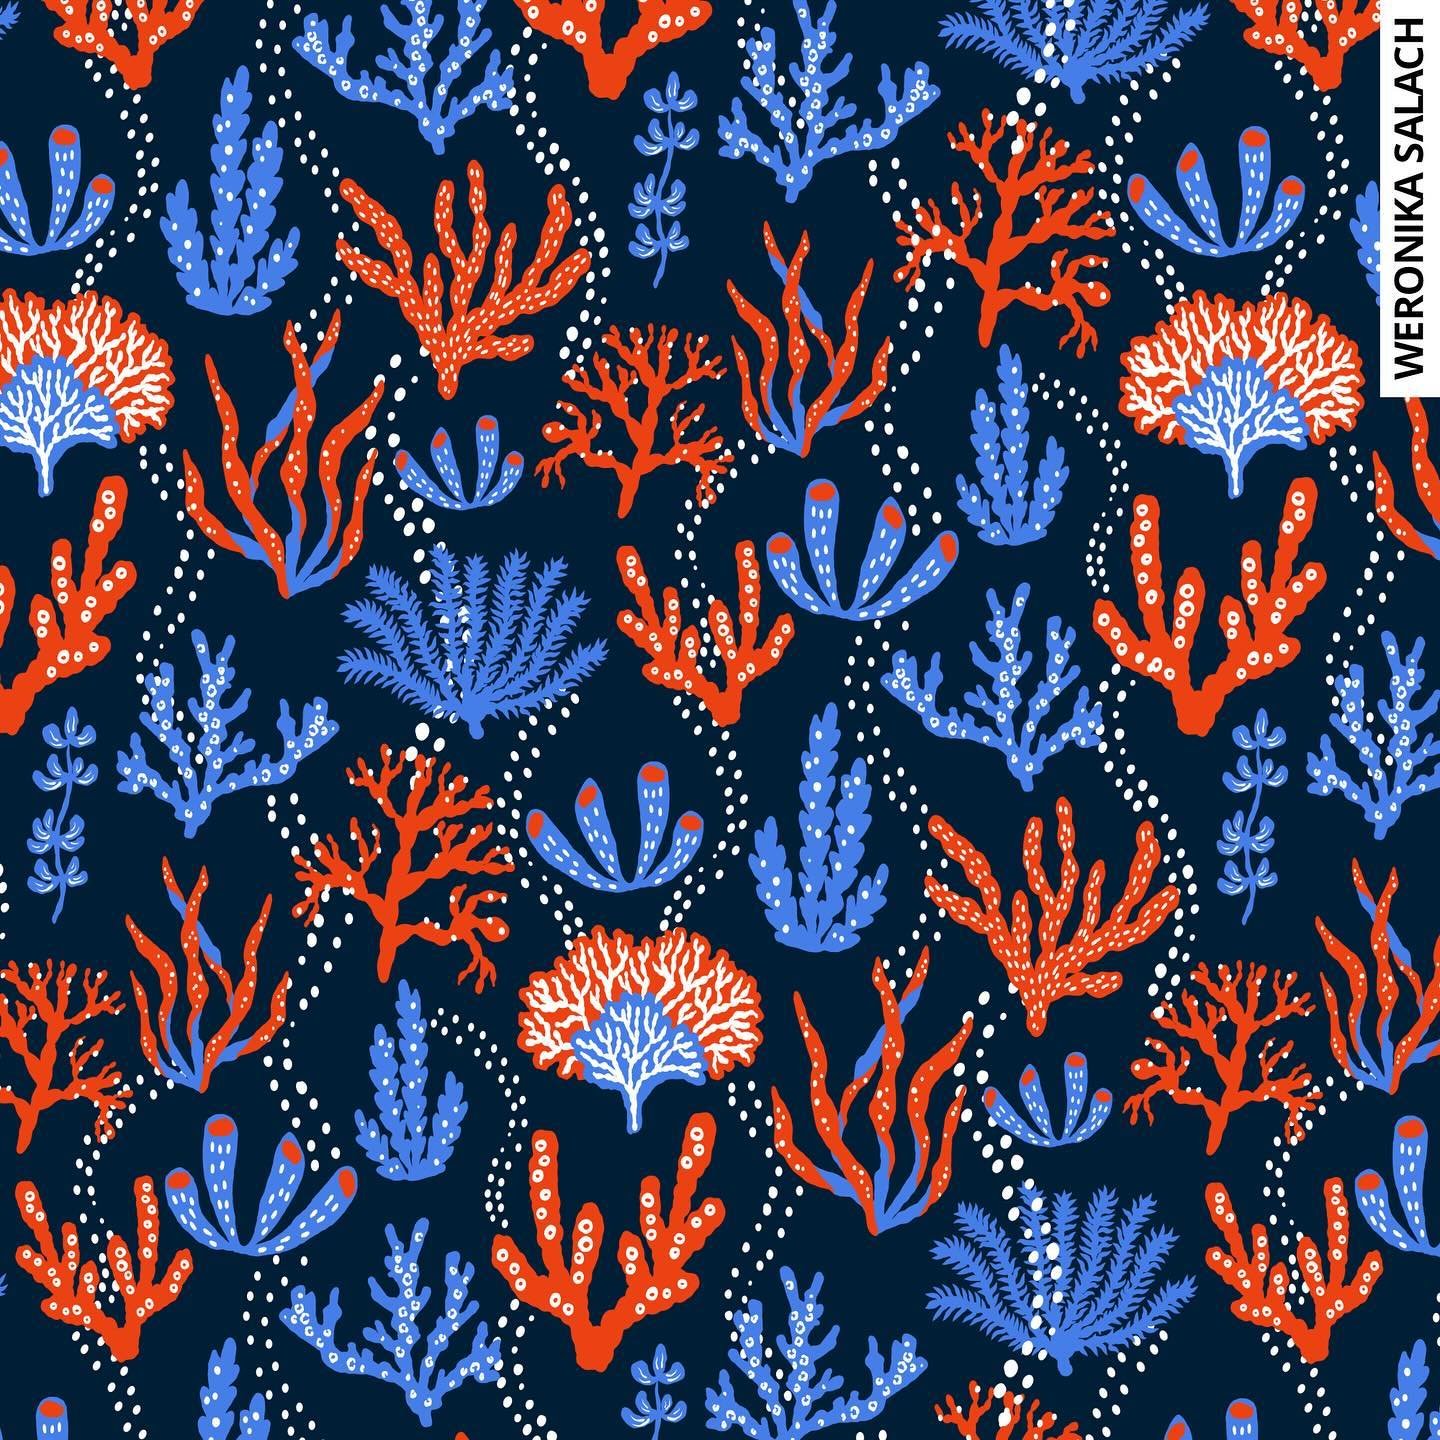 Dark summer vibes in Germany today 🪸 Stay tuned on Patreon!

A graphic coral reef seamless repeating pattern - I had it in mind for a kimono design 🤩 Missing the seaside and the beach.

Open for new pattern collaborations:
💌 hello@weronikasalach.c